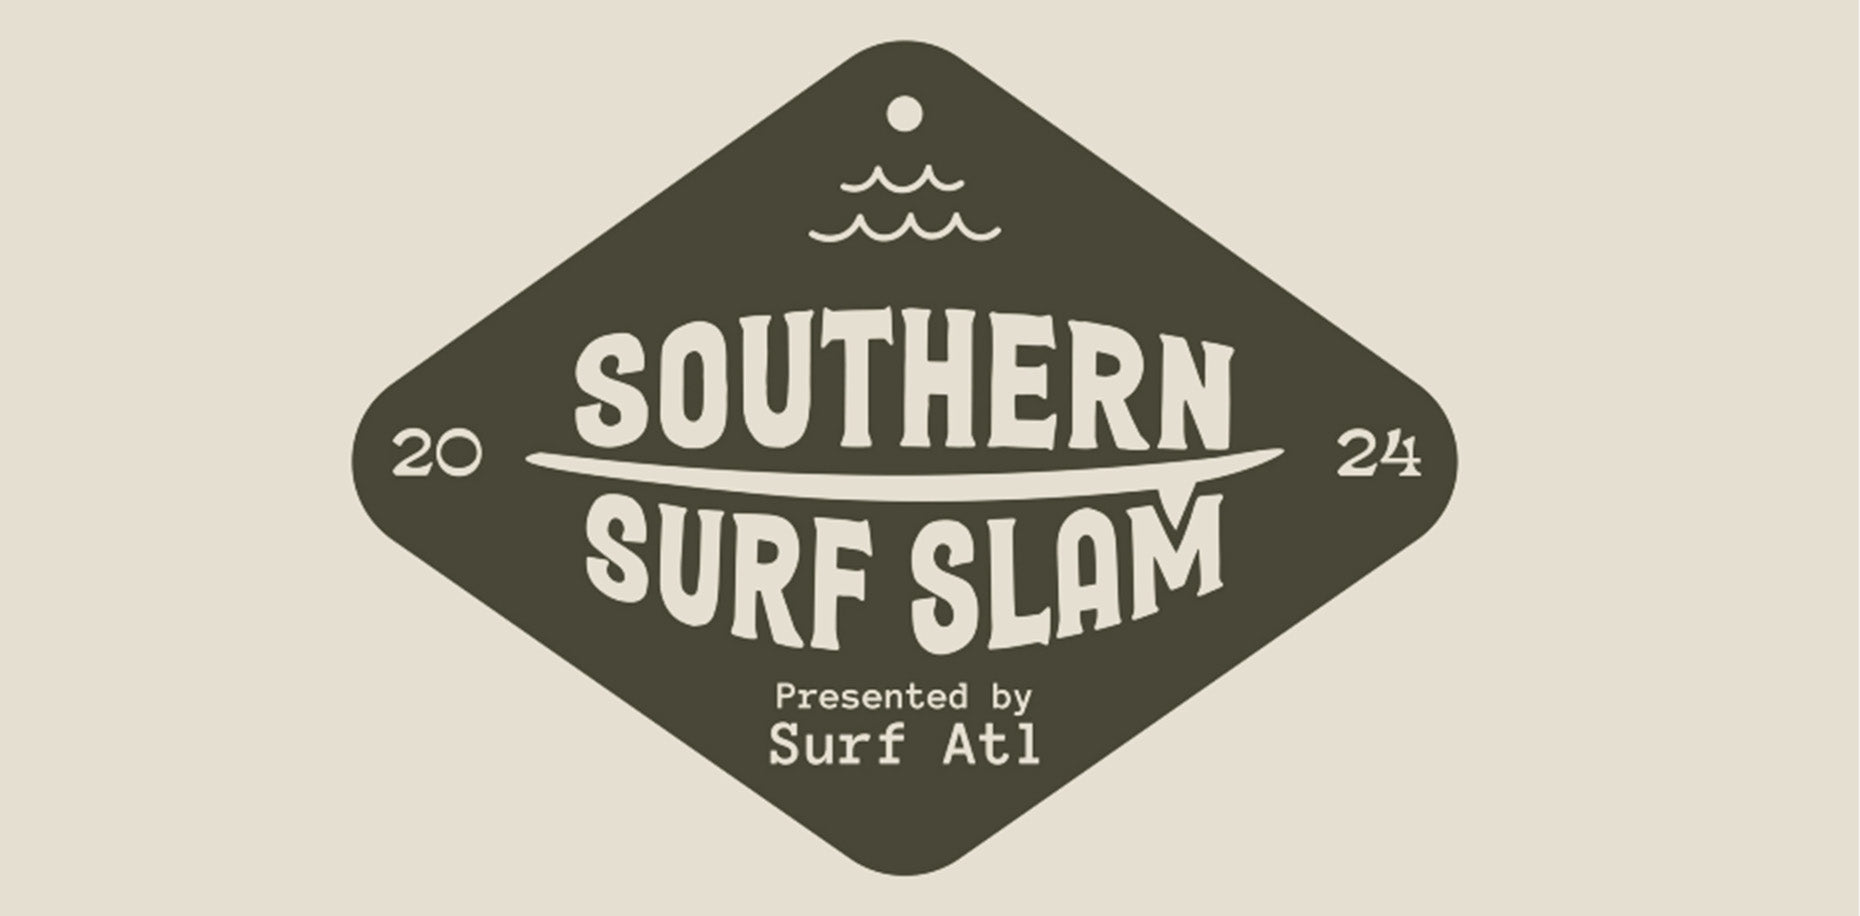 Southern Surf Slam, presented by Surf ATL